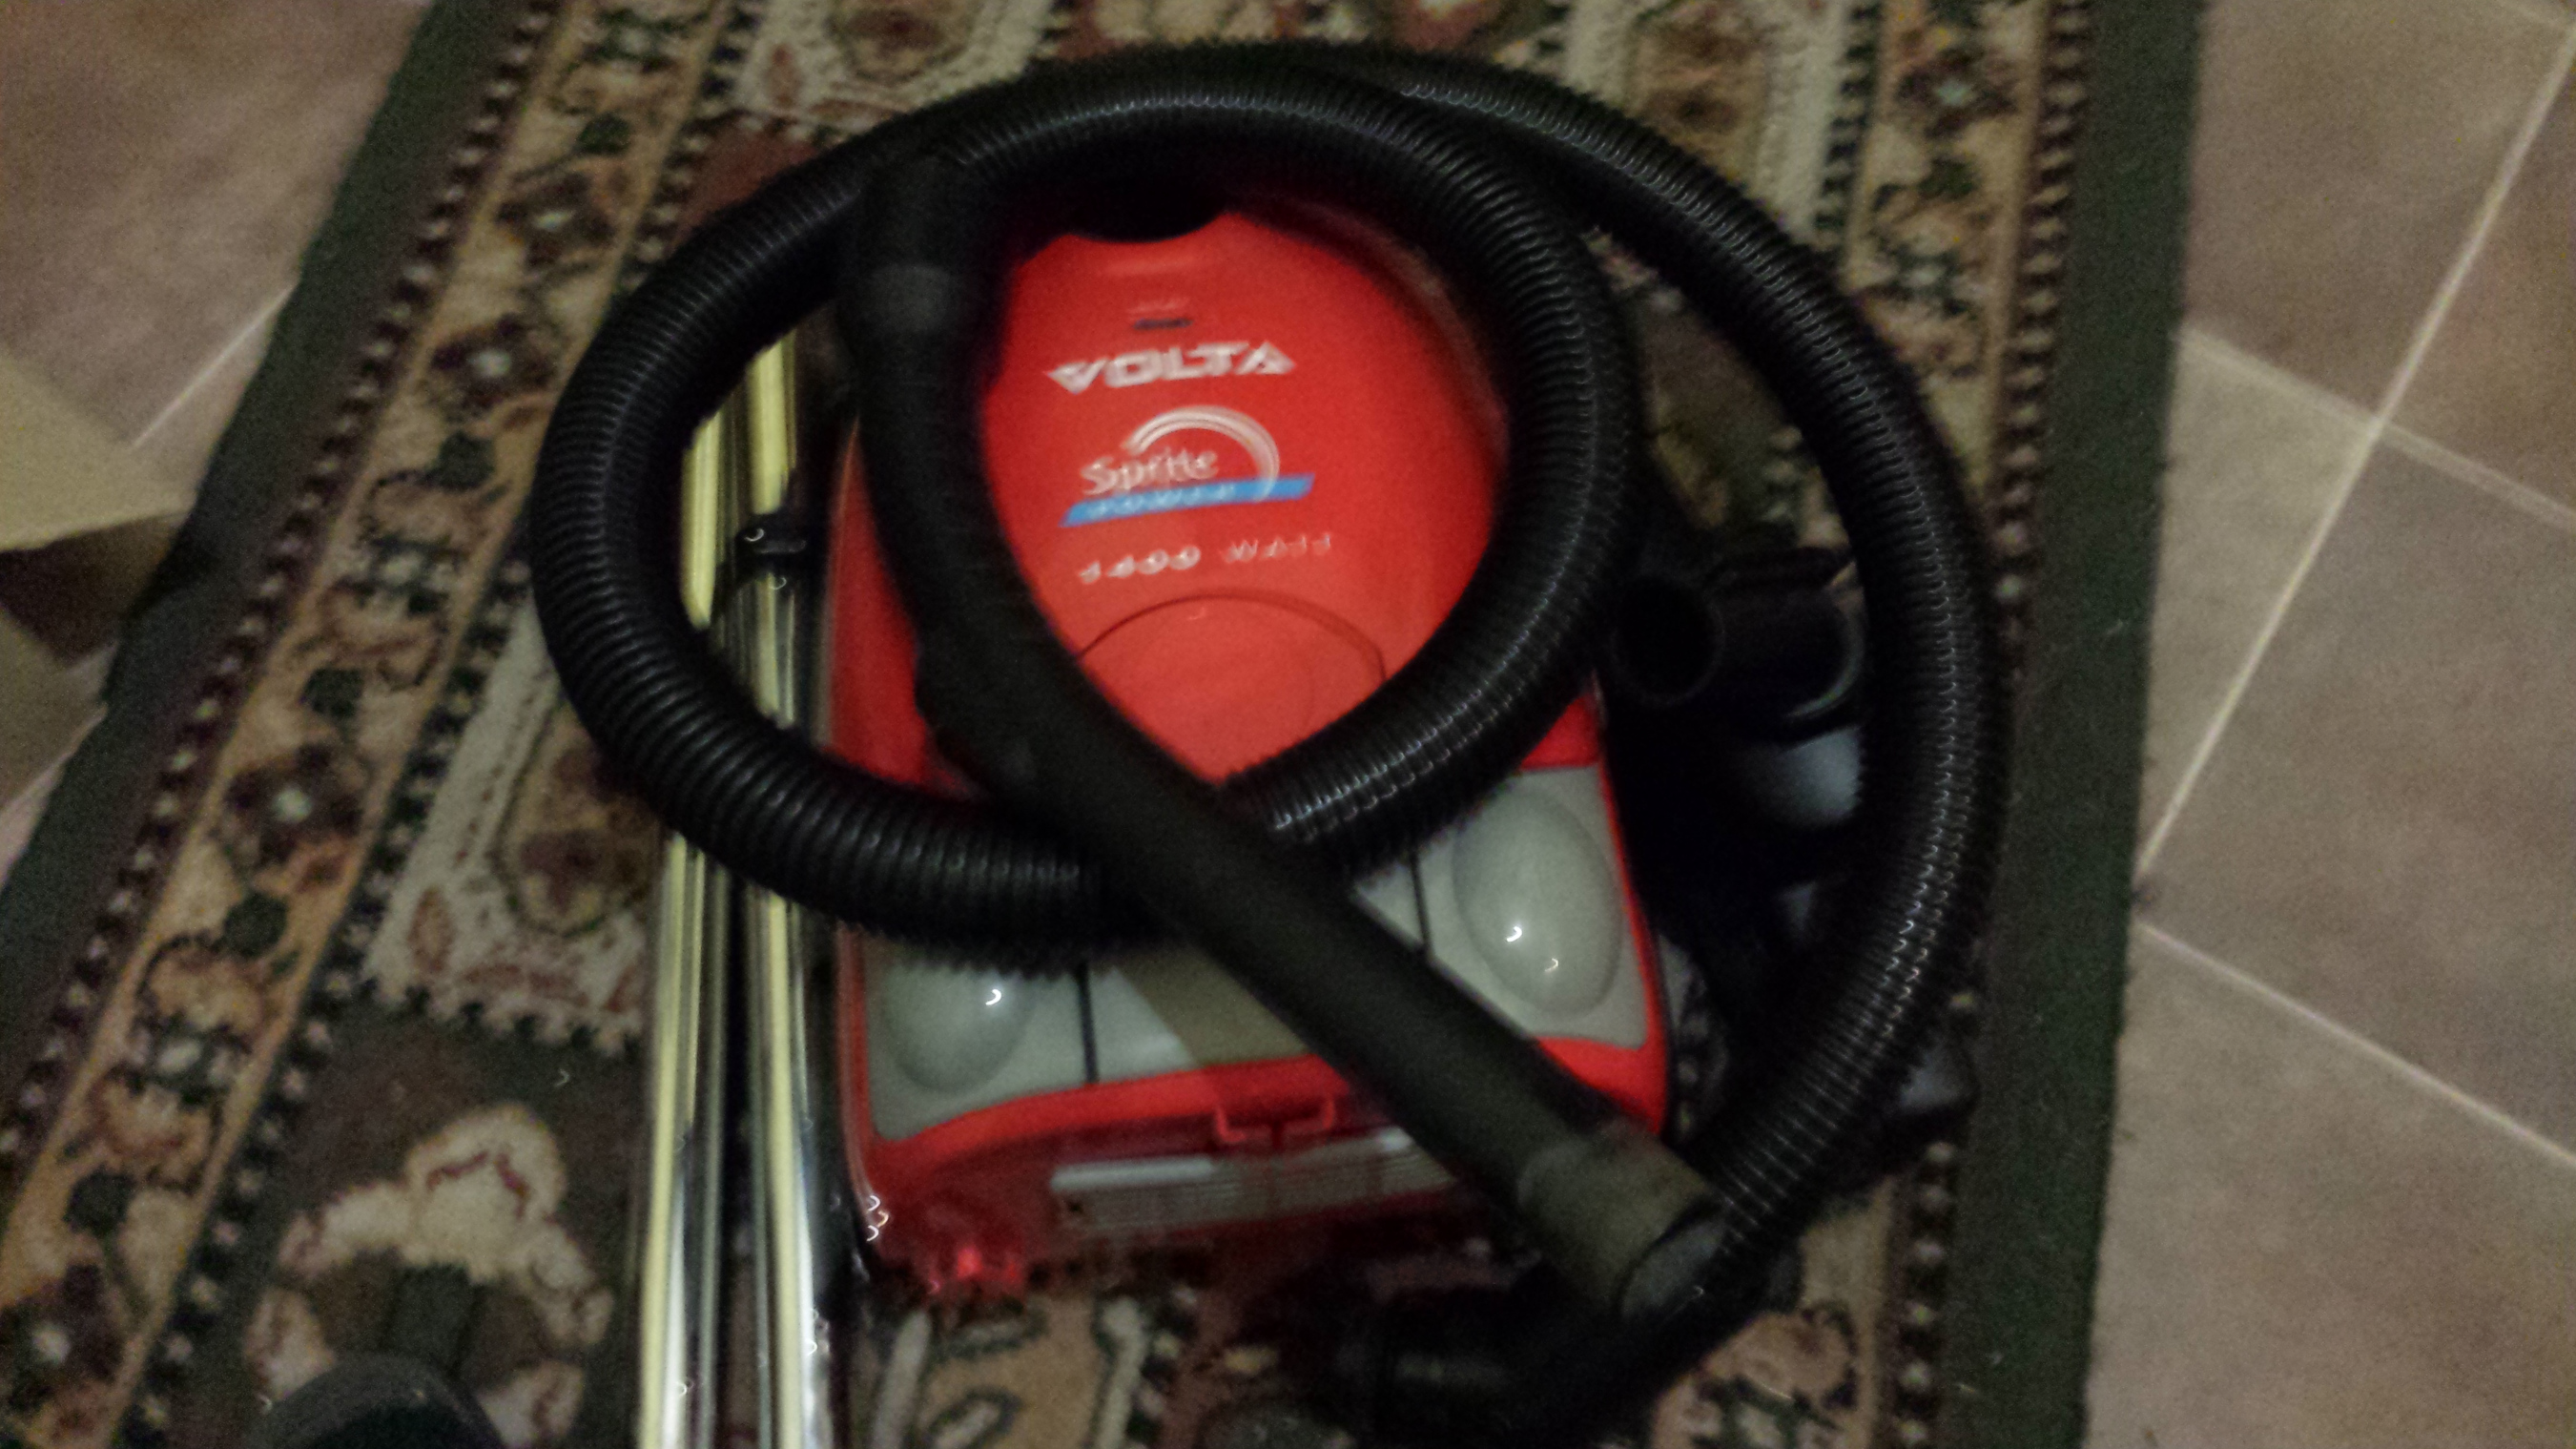 Volta Sprite 1400w Vacuum Cleaner Used a Few Times GOES Very Good